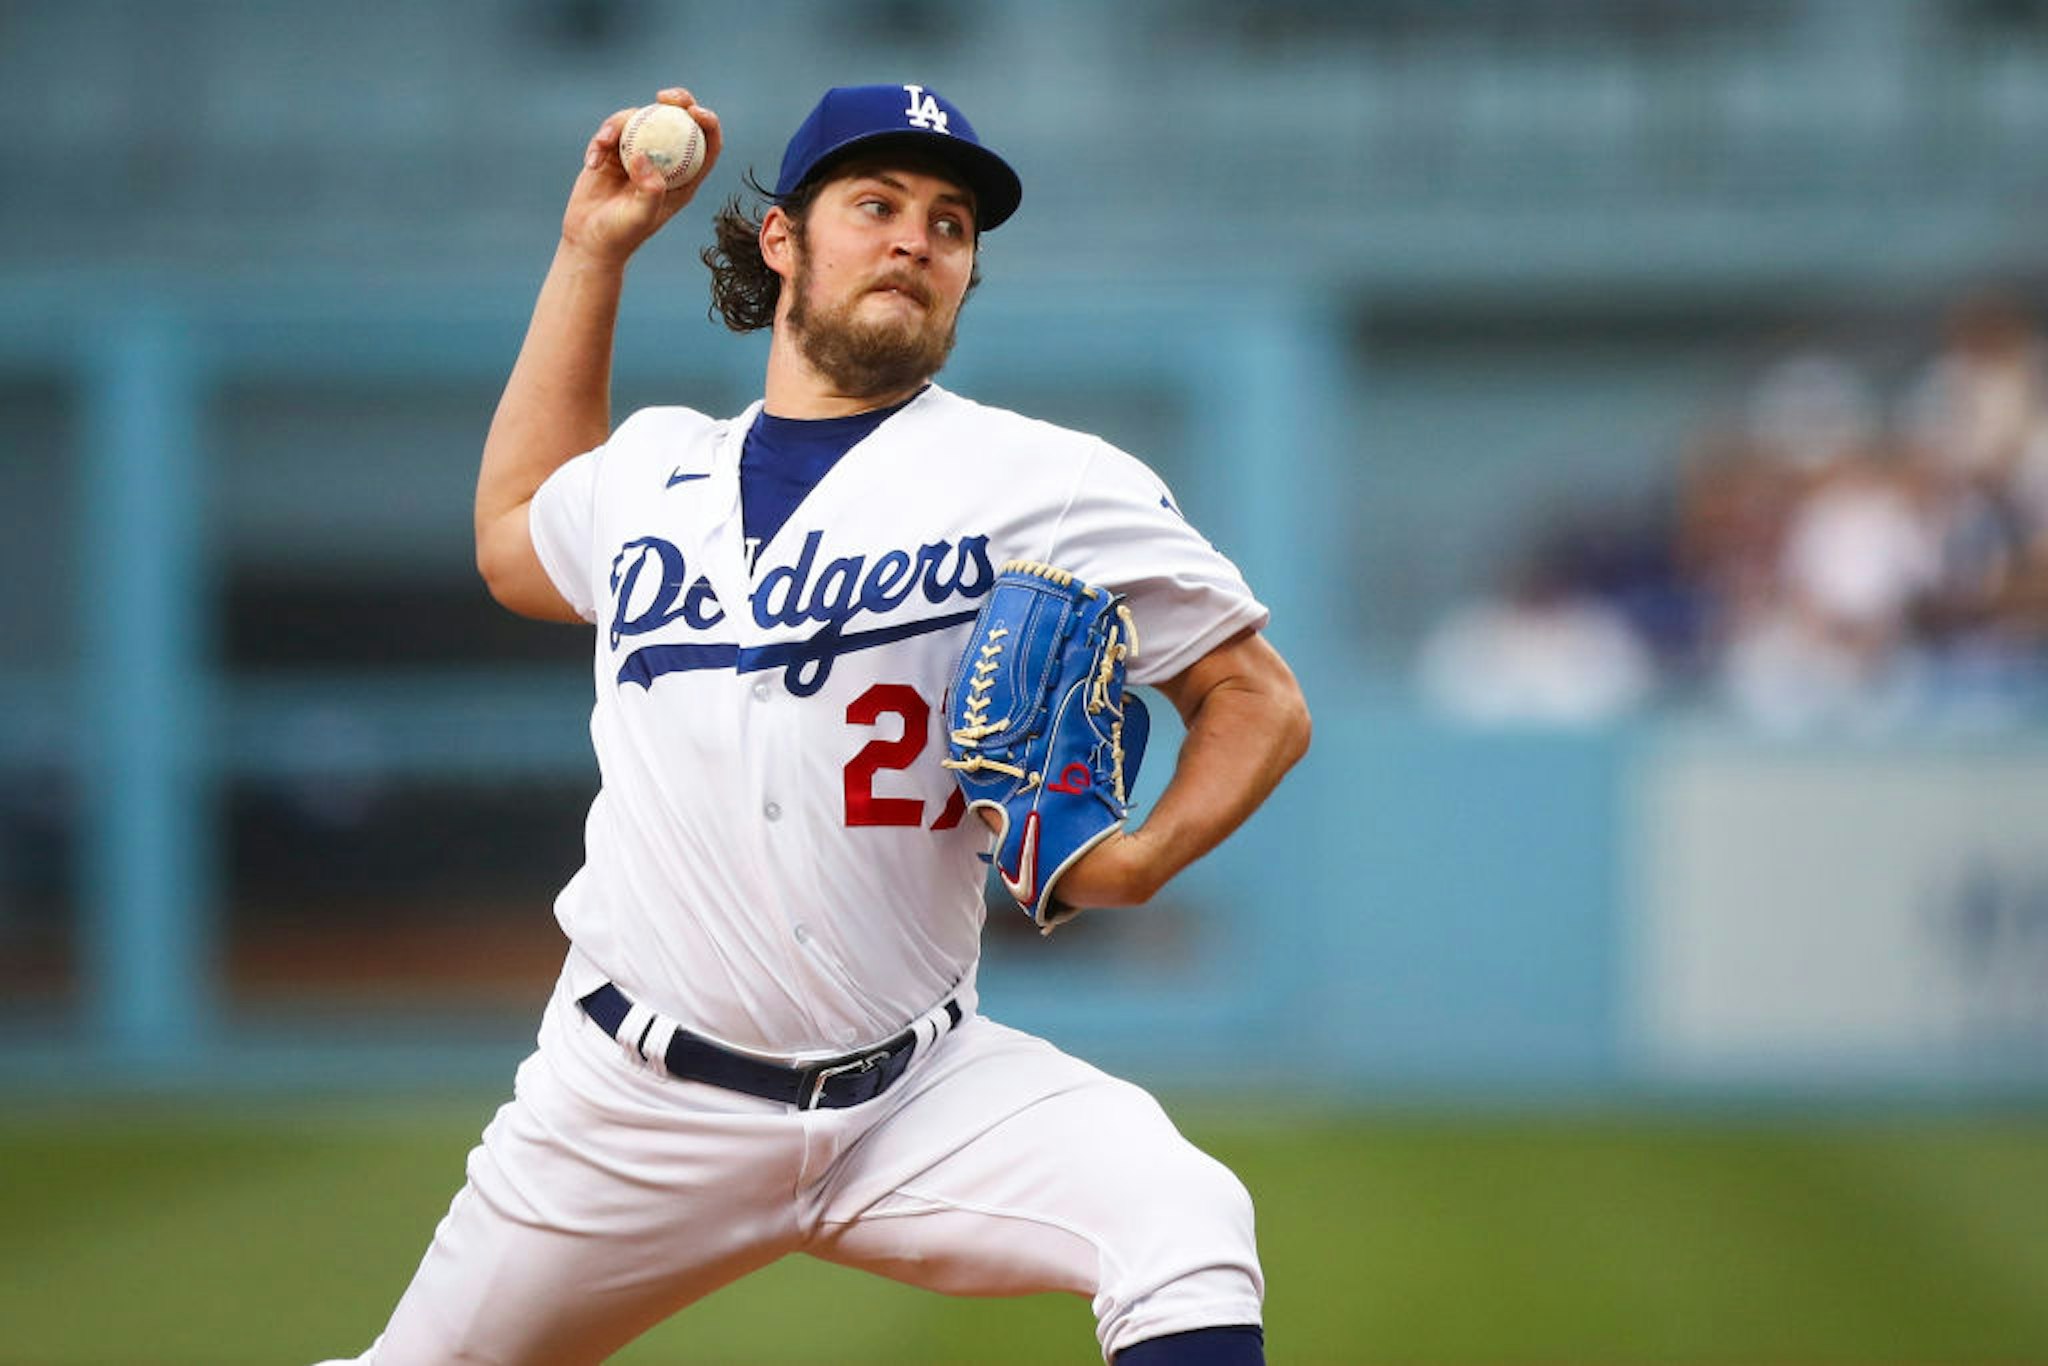 Trevor Bauer #27 of the Los Angeles Dodgers pitches in the first inning against the San Francisco Giants at Dodger Stadium on June 28, 2021 in Los Angeles, California.